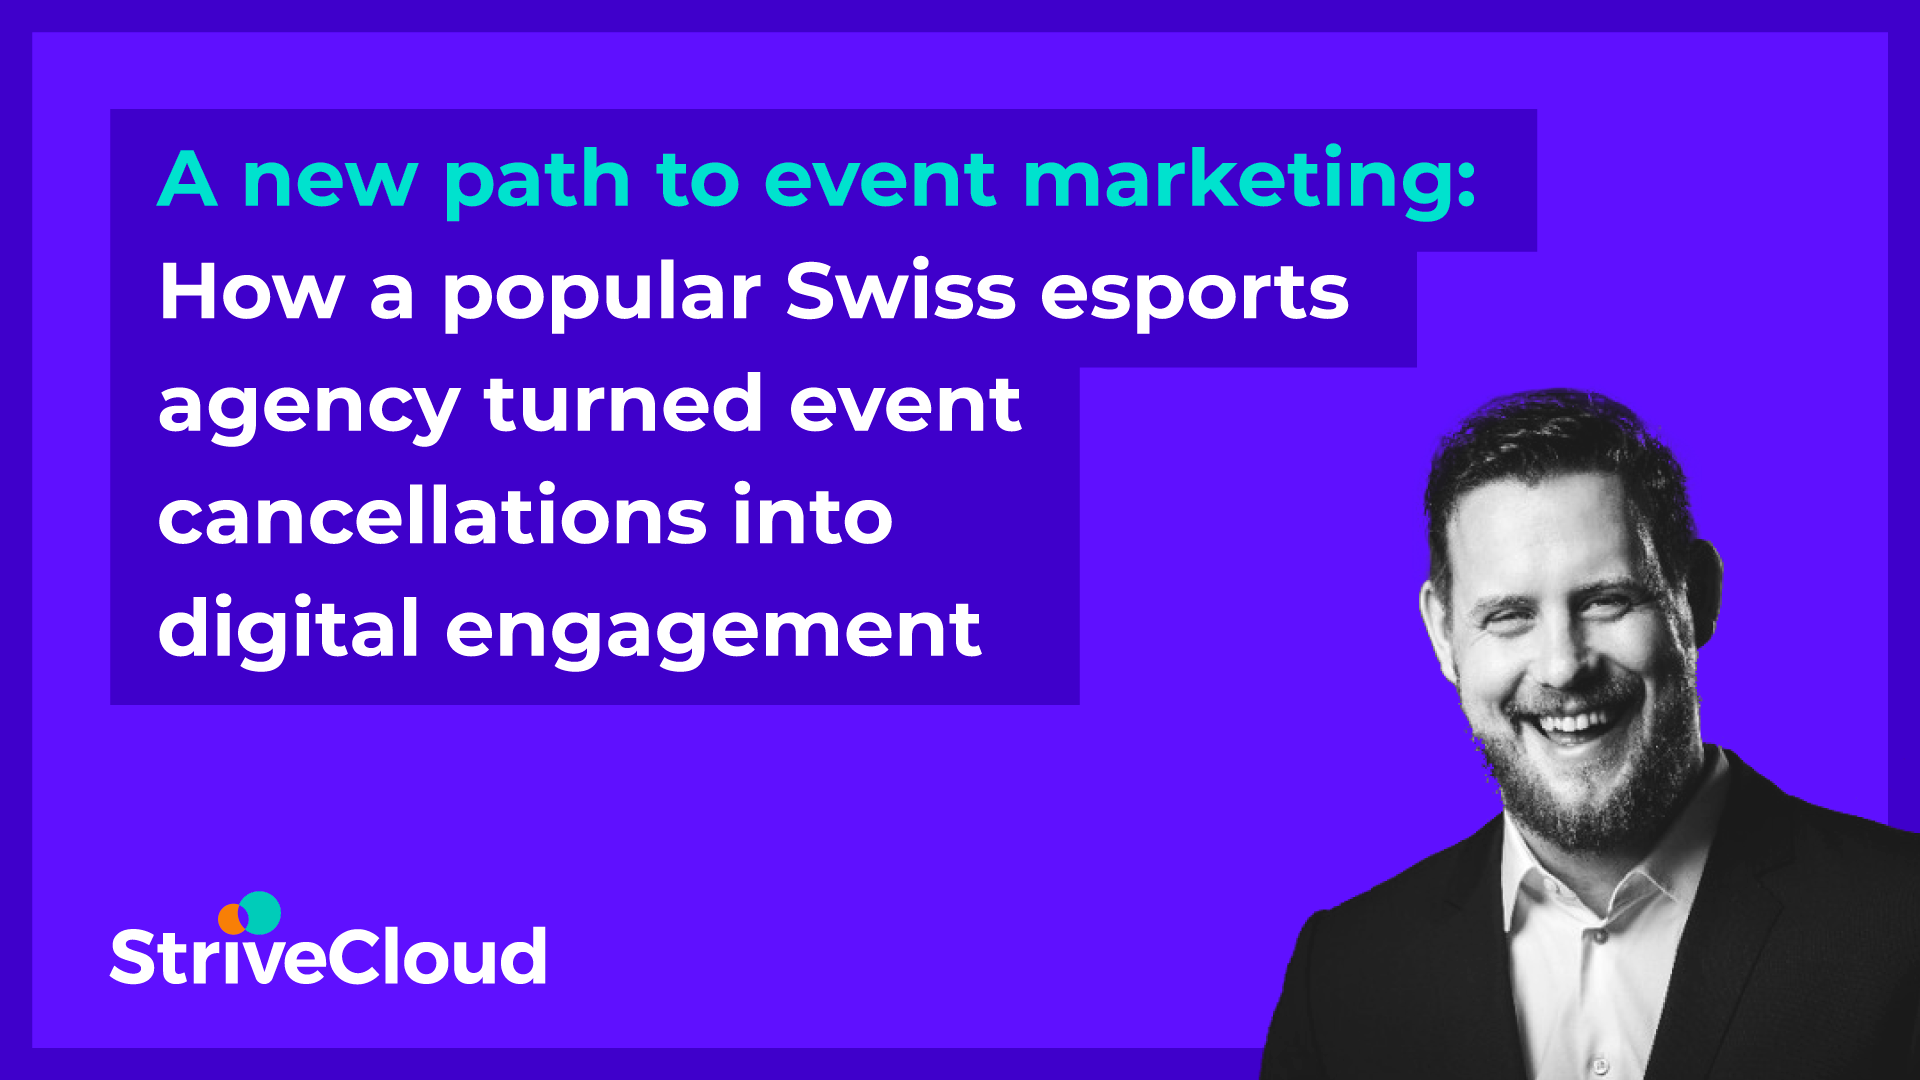 A new path to event marketing: How a popular Swiss esports agency turned event cancellations into digital engagement